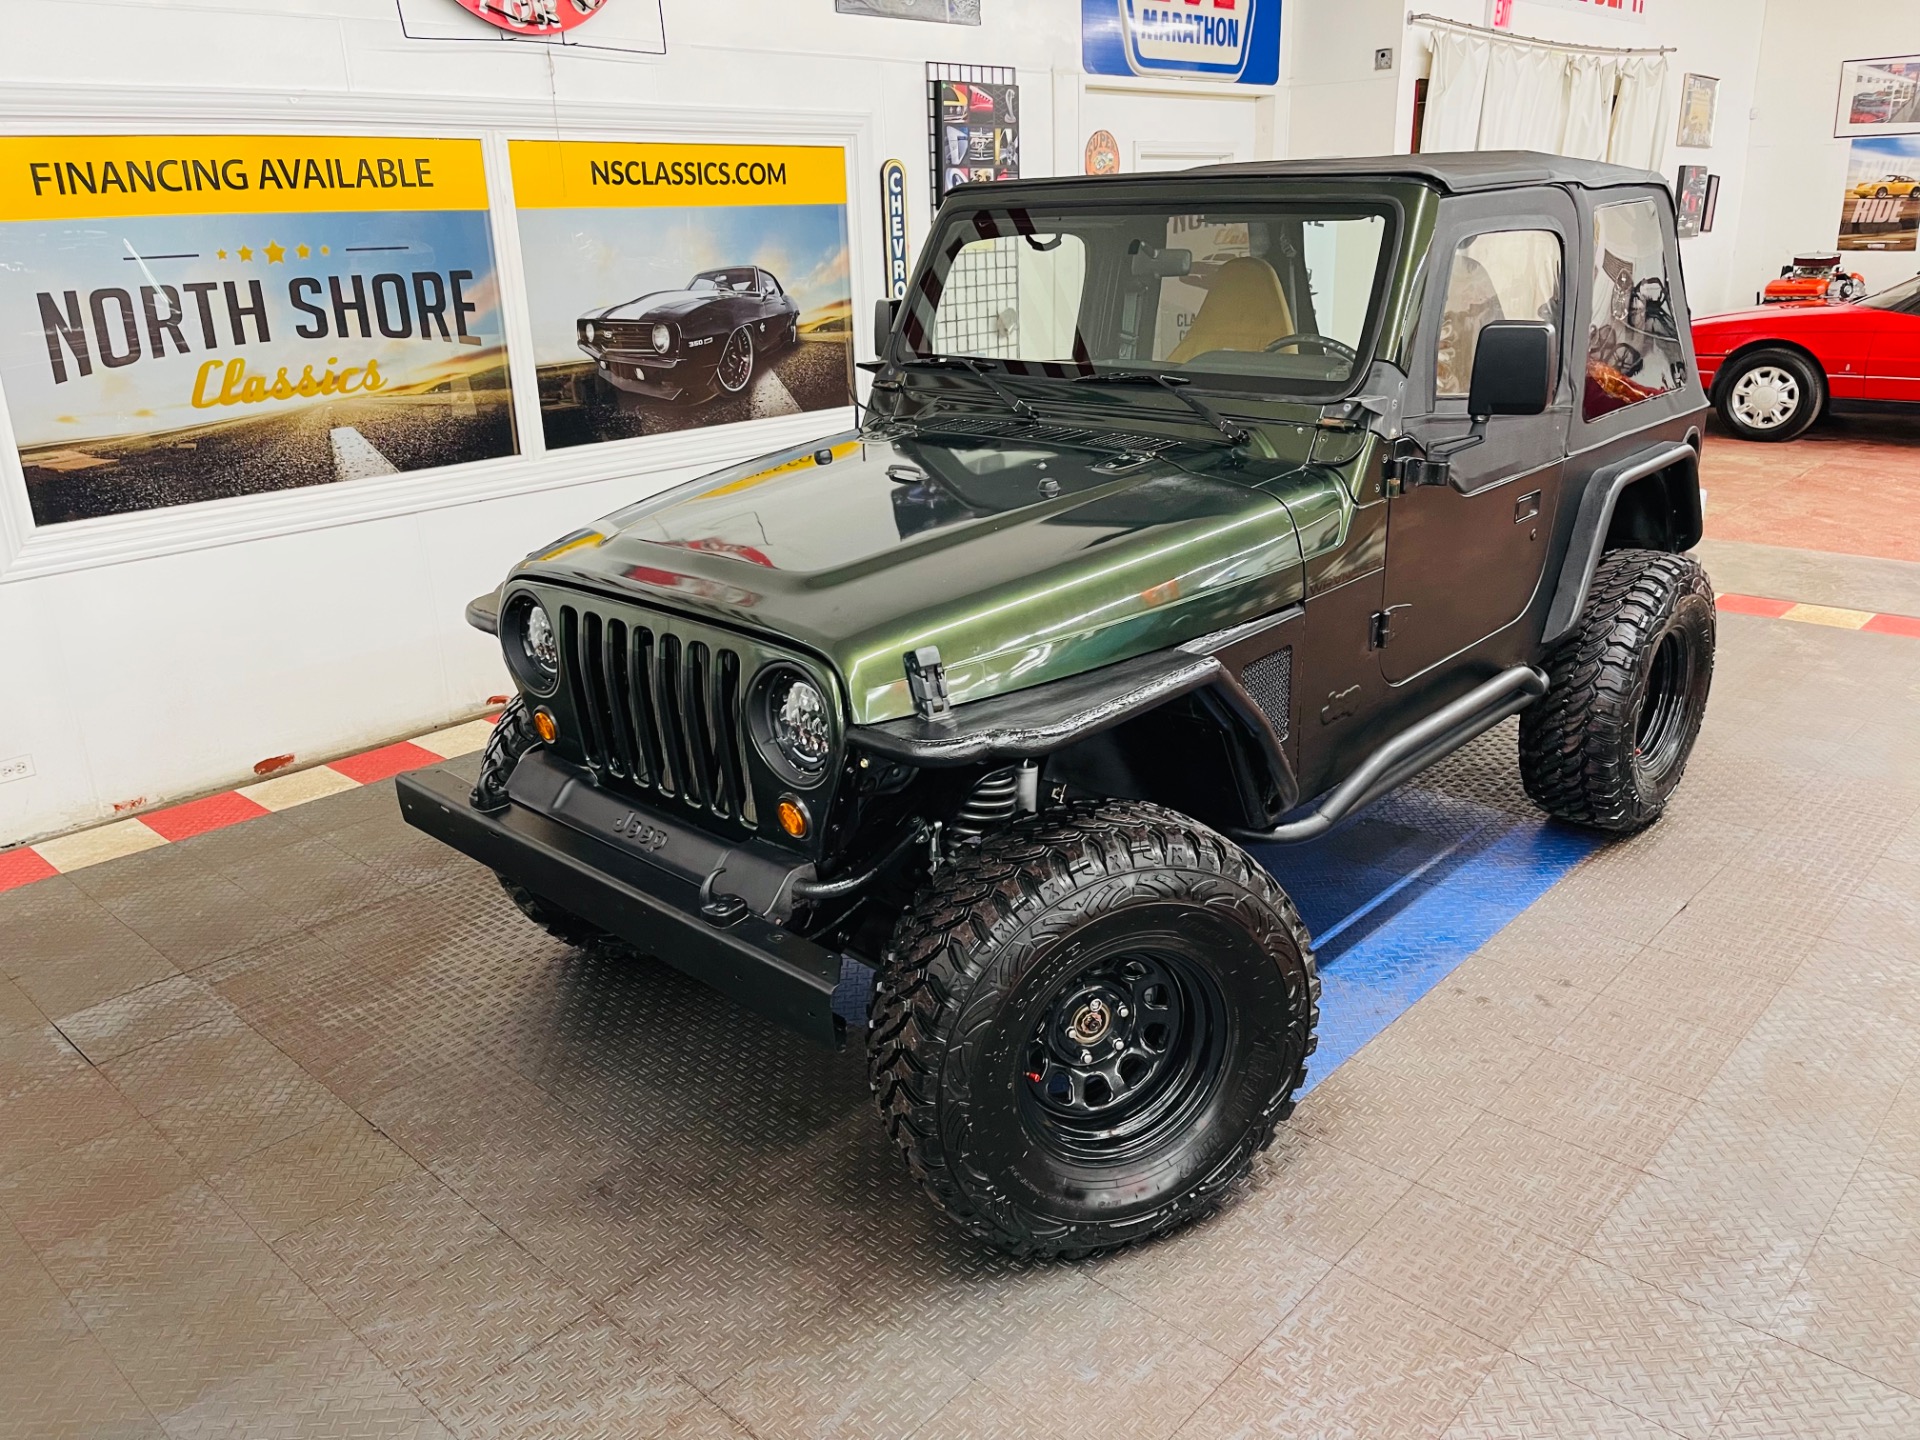 Used 1997 Jeep Wrangler TJ SE - SEE VIDEO For Sale (Sold) | North Shore  Classics Stock #97412RGCV